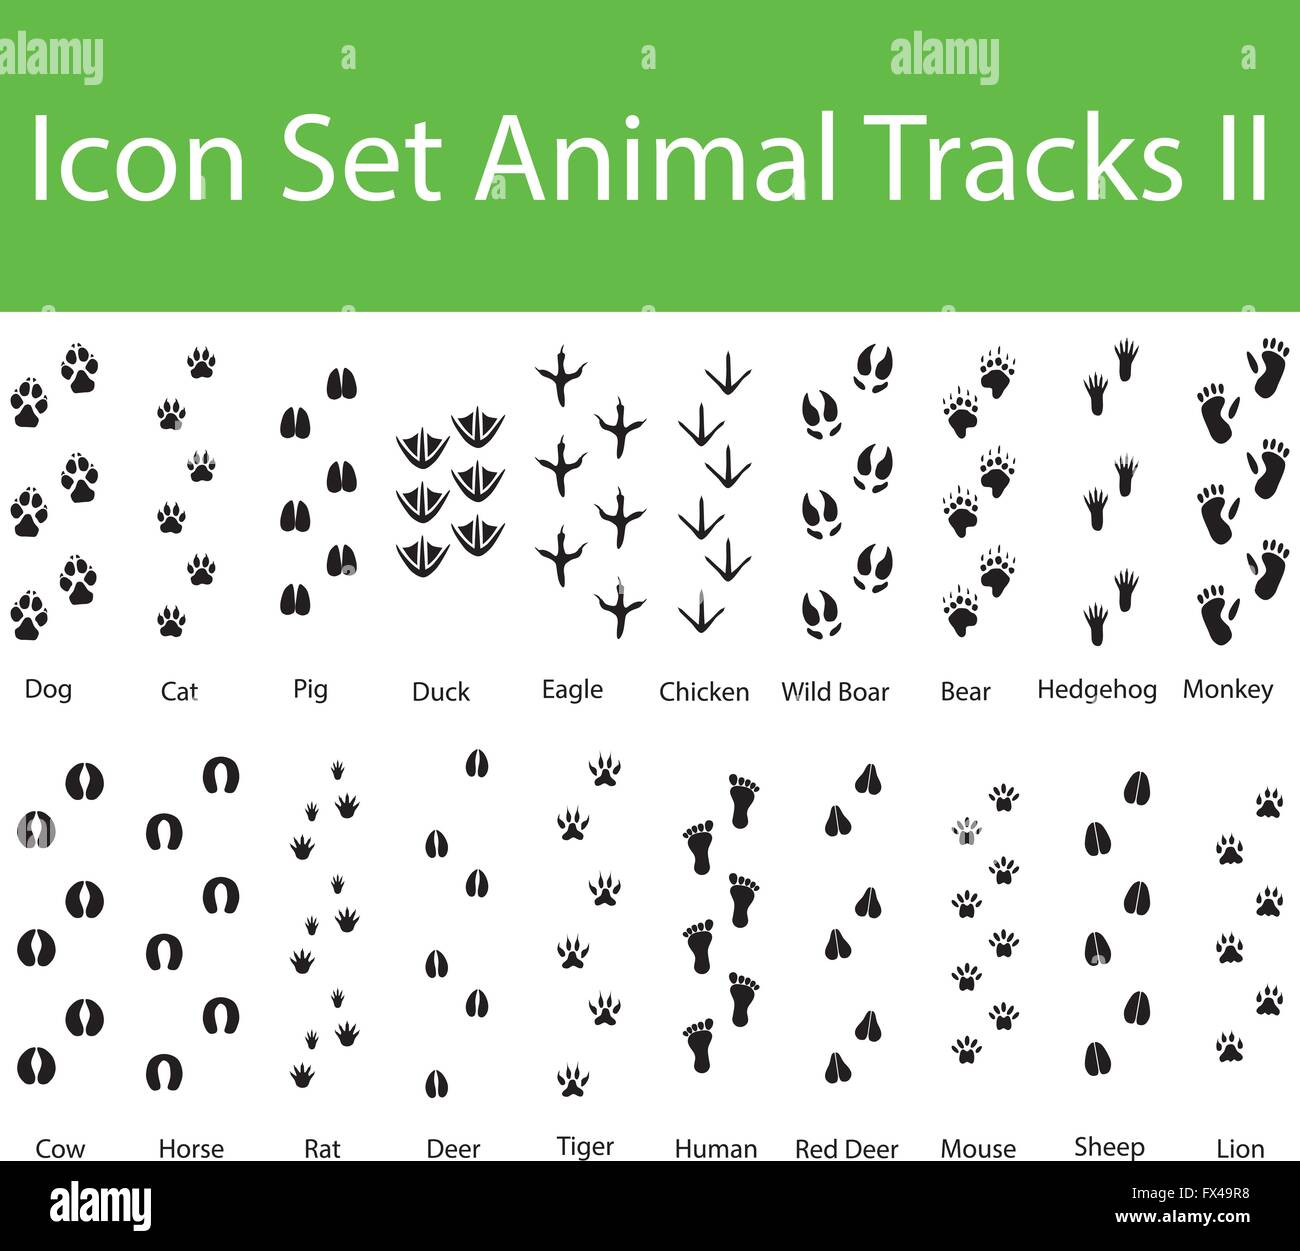 Icon Set Animal Tracks II with 20 icons for the creative use in graphic design Stock Vector